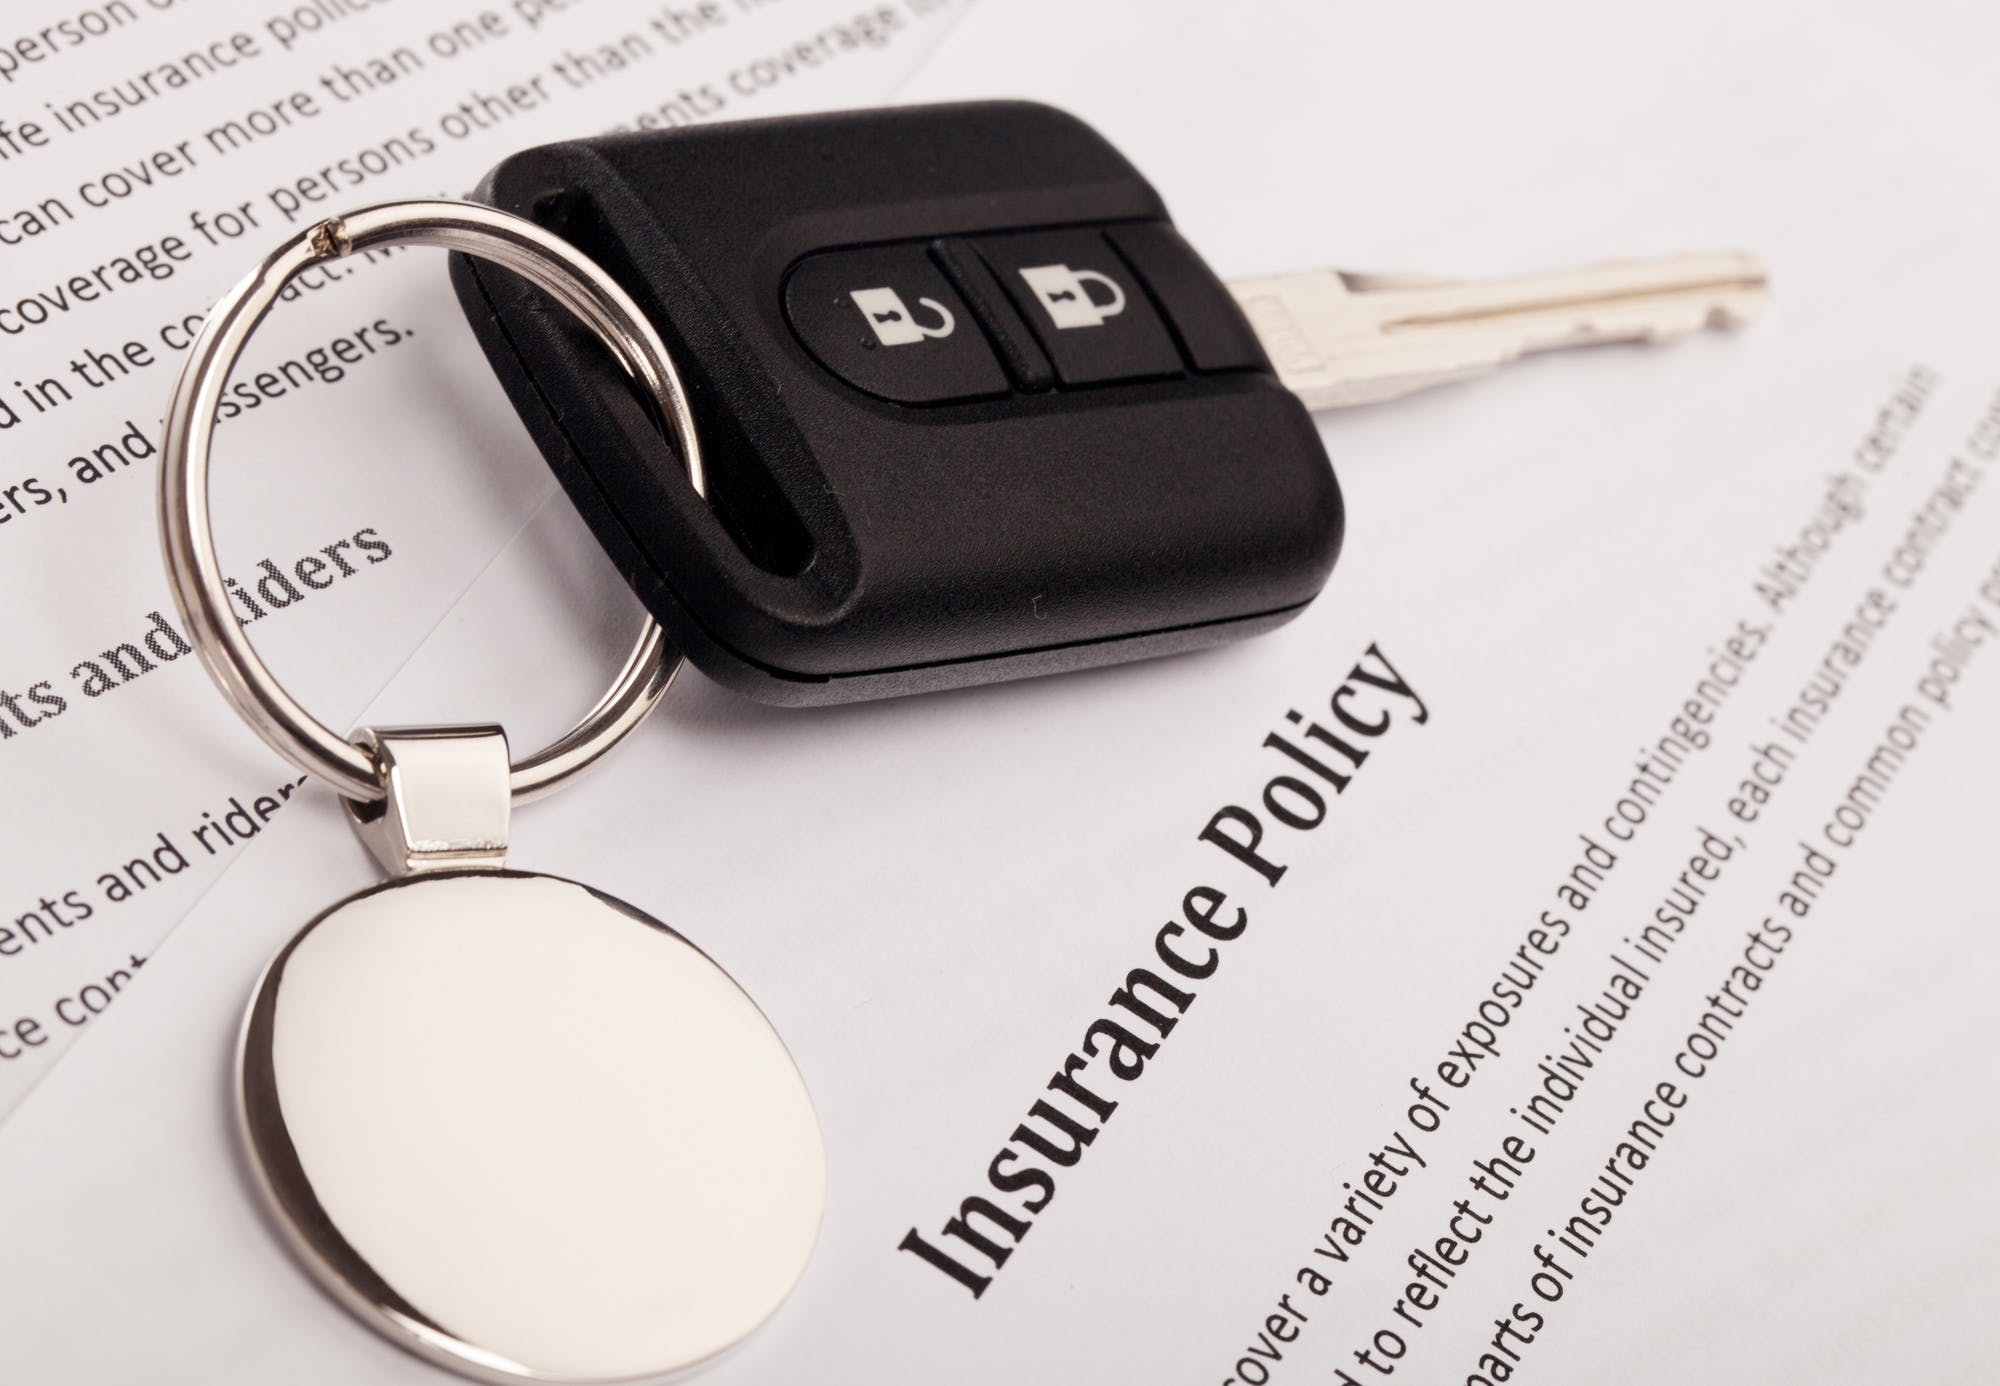 10 Ways To Learn Monthly Car Insurance Effectively